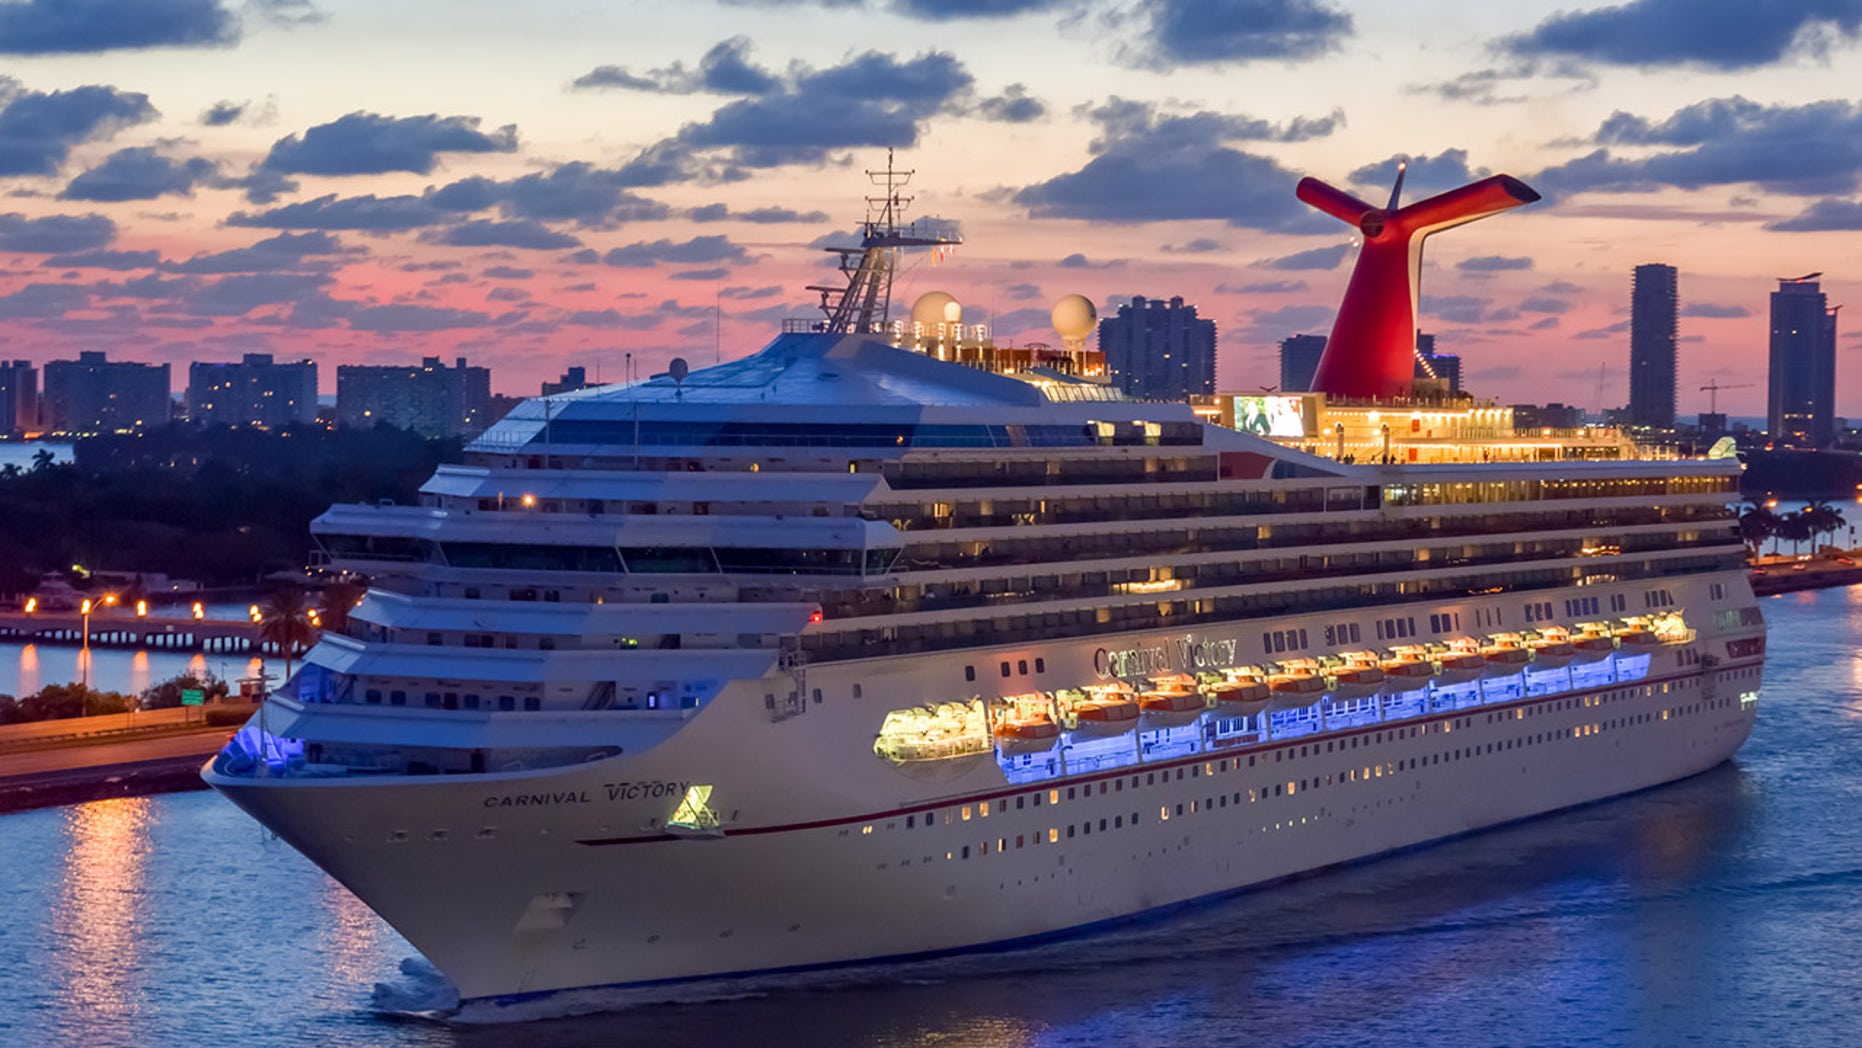 Carnival Cruise passenger reported as missing, Coast Guard search